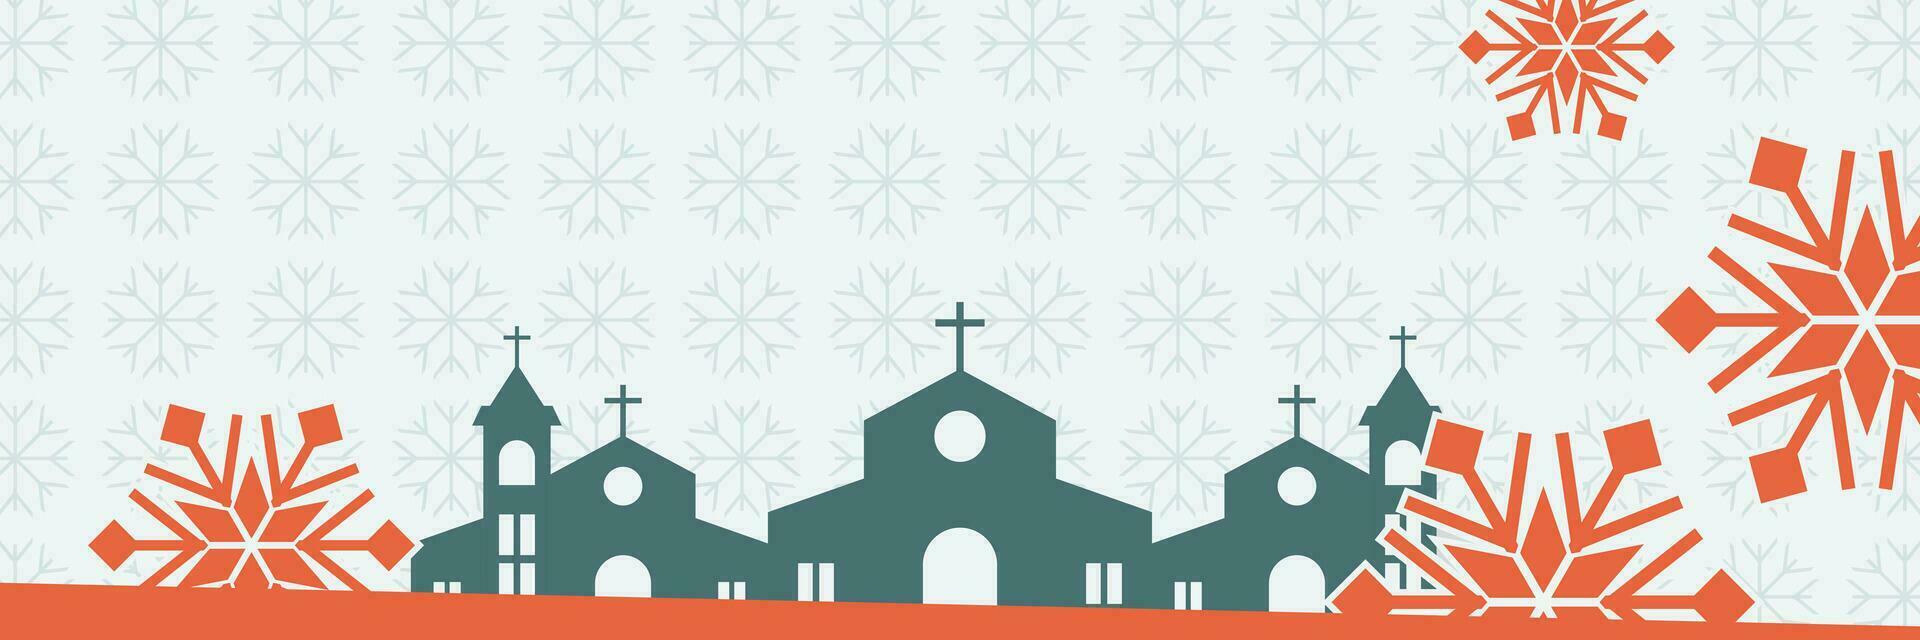 Christmas background with snow ornaments and church silhouette. vector template for banner, poster, social media, Christian holiday greeting card.